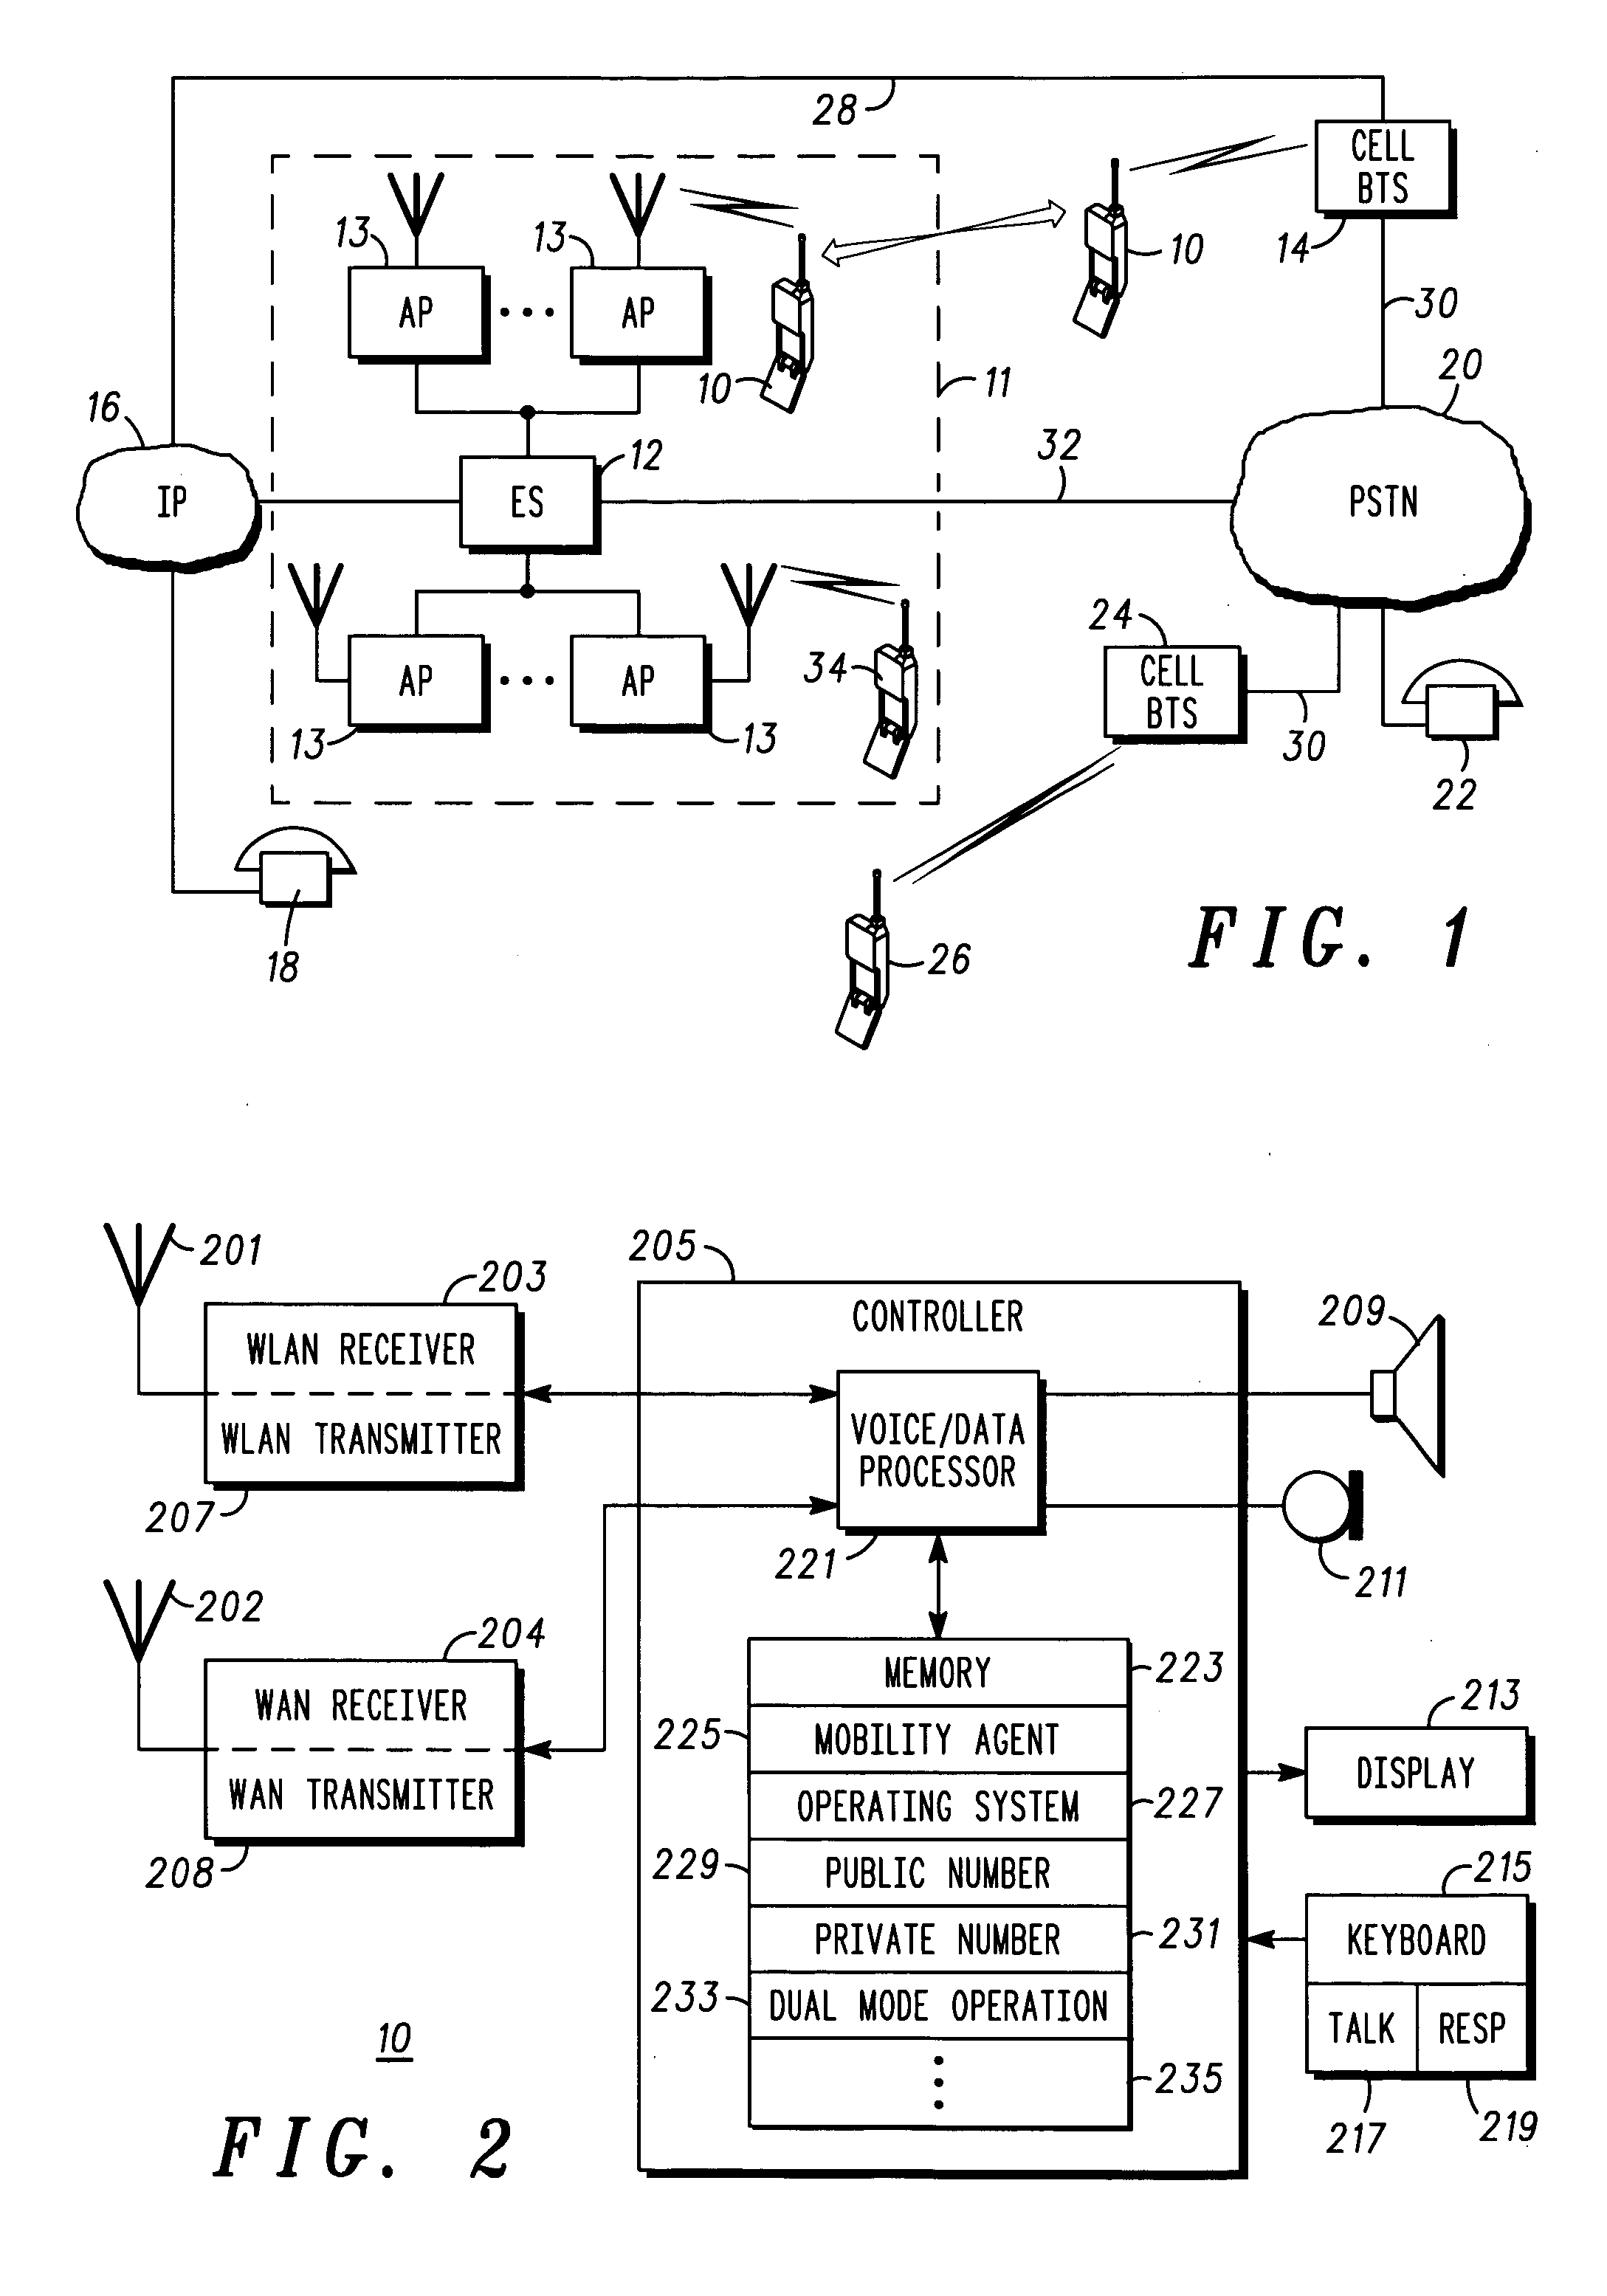 Method and apparatus for providing a communication unit with a handoff between networks